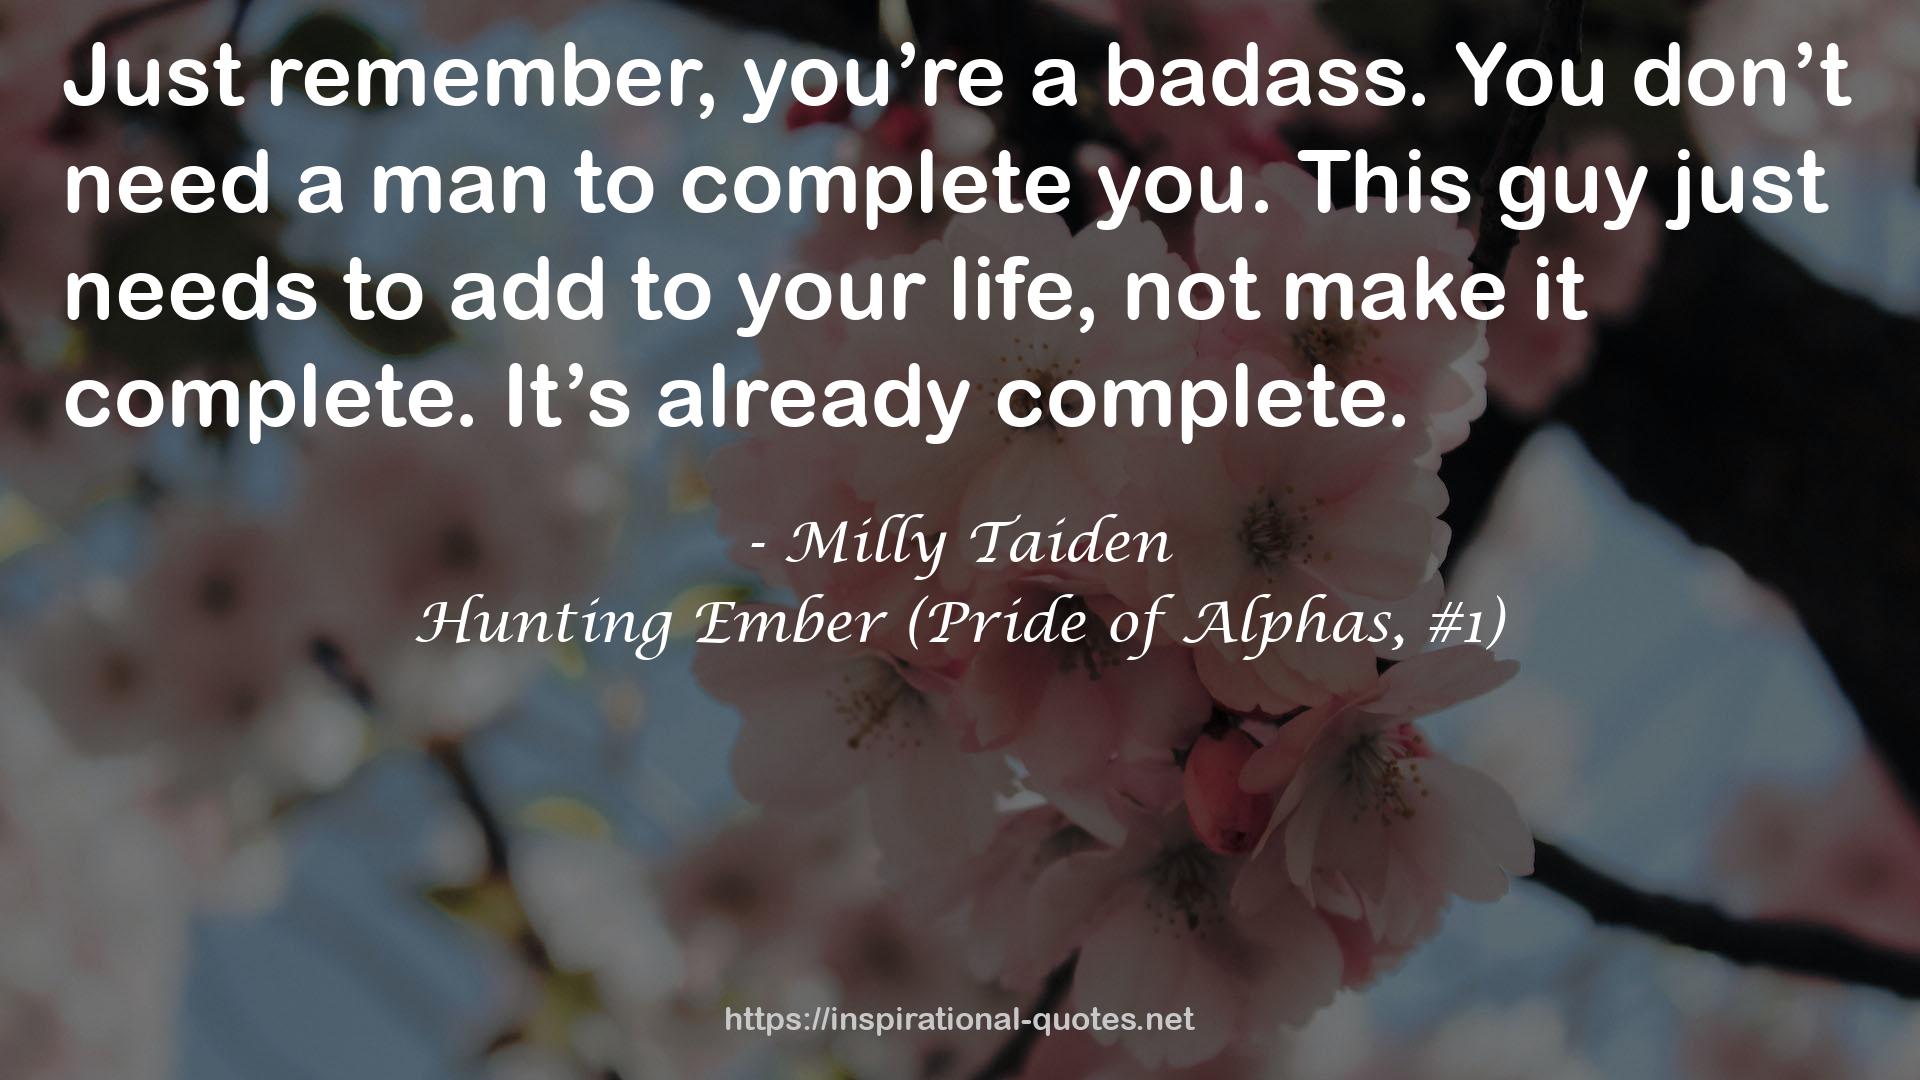 Hunting Ember (Pride of Alphas, #1) QUOTES